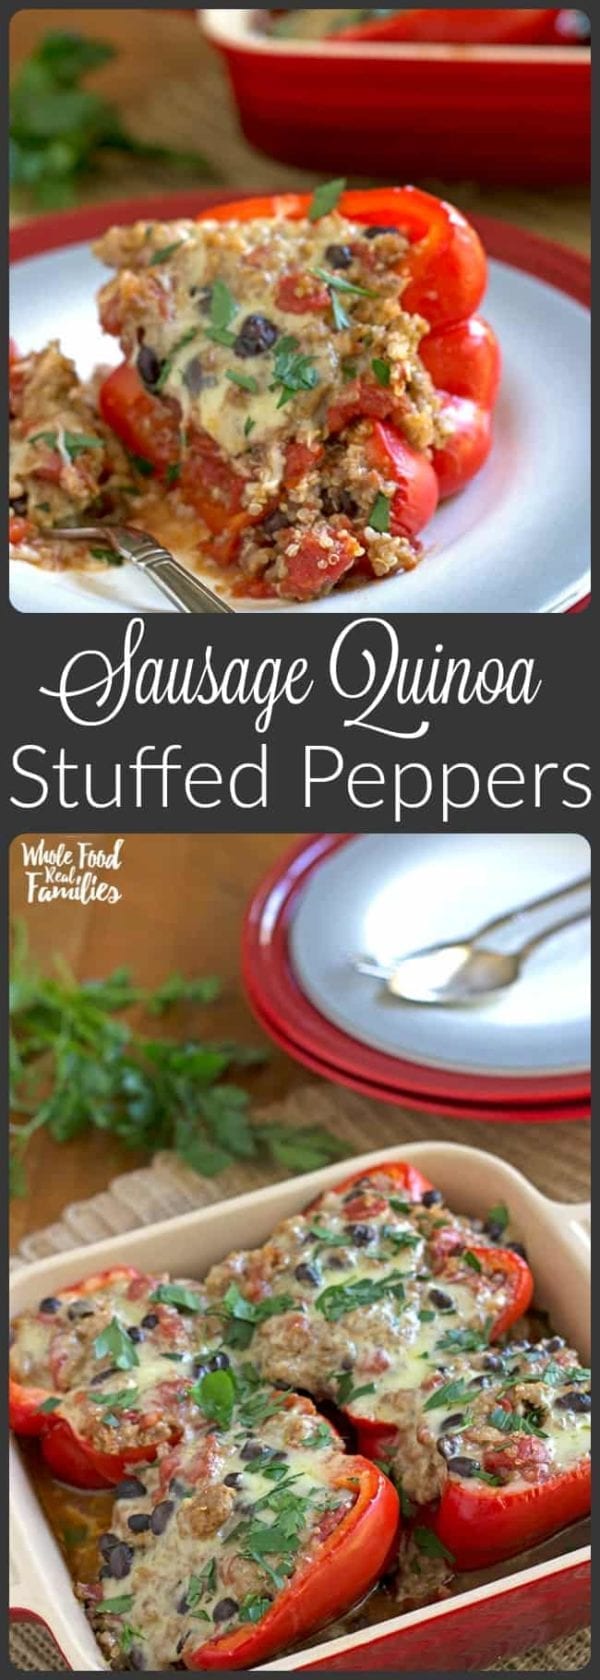 Sausage Quinoa Stuffed Peppers | My Nourished Home